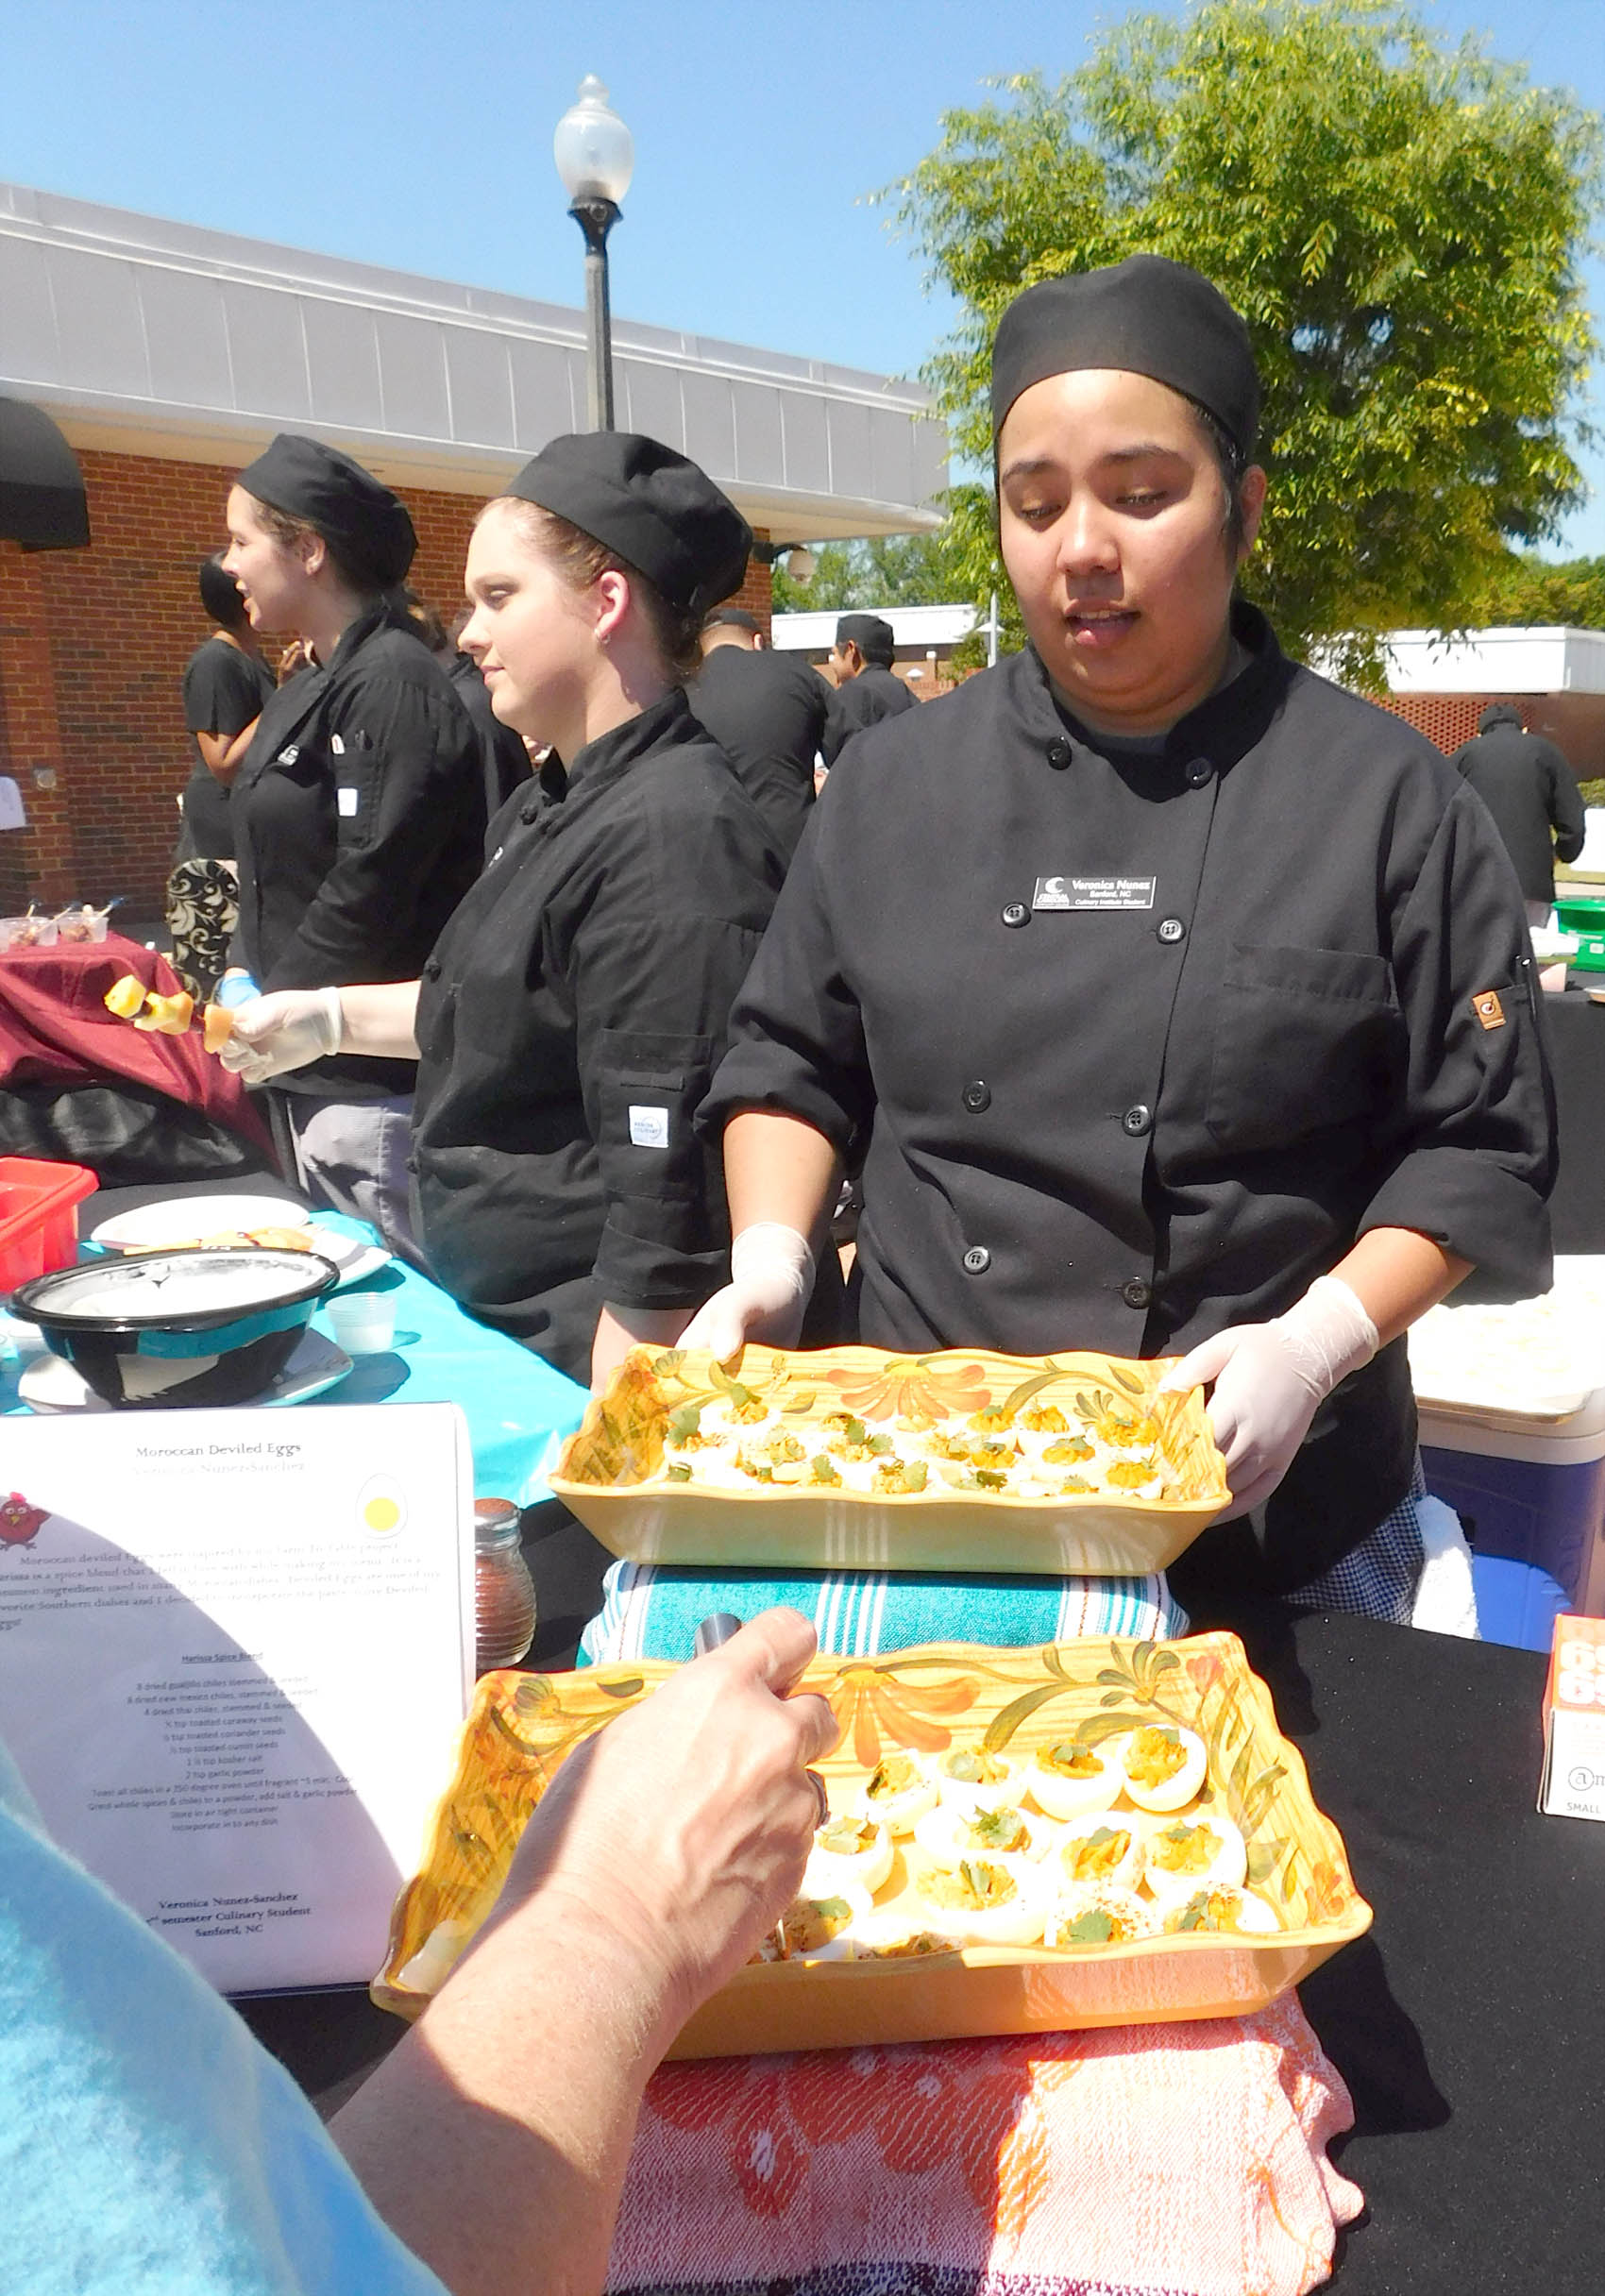 Click to enlarge,  Veronica Nunez-Sanchez, of Sanford, with her Moroccan Spiced Deviled Eggs with Cilantro garnish, was the Best of Show winner at the Second Annual Central Carolina Community College Culinary Showcase. The event, featuring dishes by Culinary &amp; Hospitality Arts students represented from Chatham, Harnett, and Lee counties, was held April 26 on the CCCC Lee Main Campus. Special judges included WRAL's Brian Shrader (host of Local Dish) and Lisa Prince (Marketing Specialist for the North Carolina Department of Agriculture and Consumer Services and Host of Flavor, NC). 